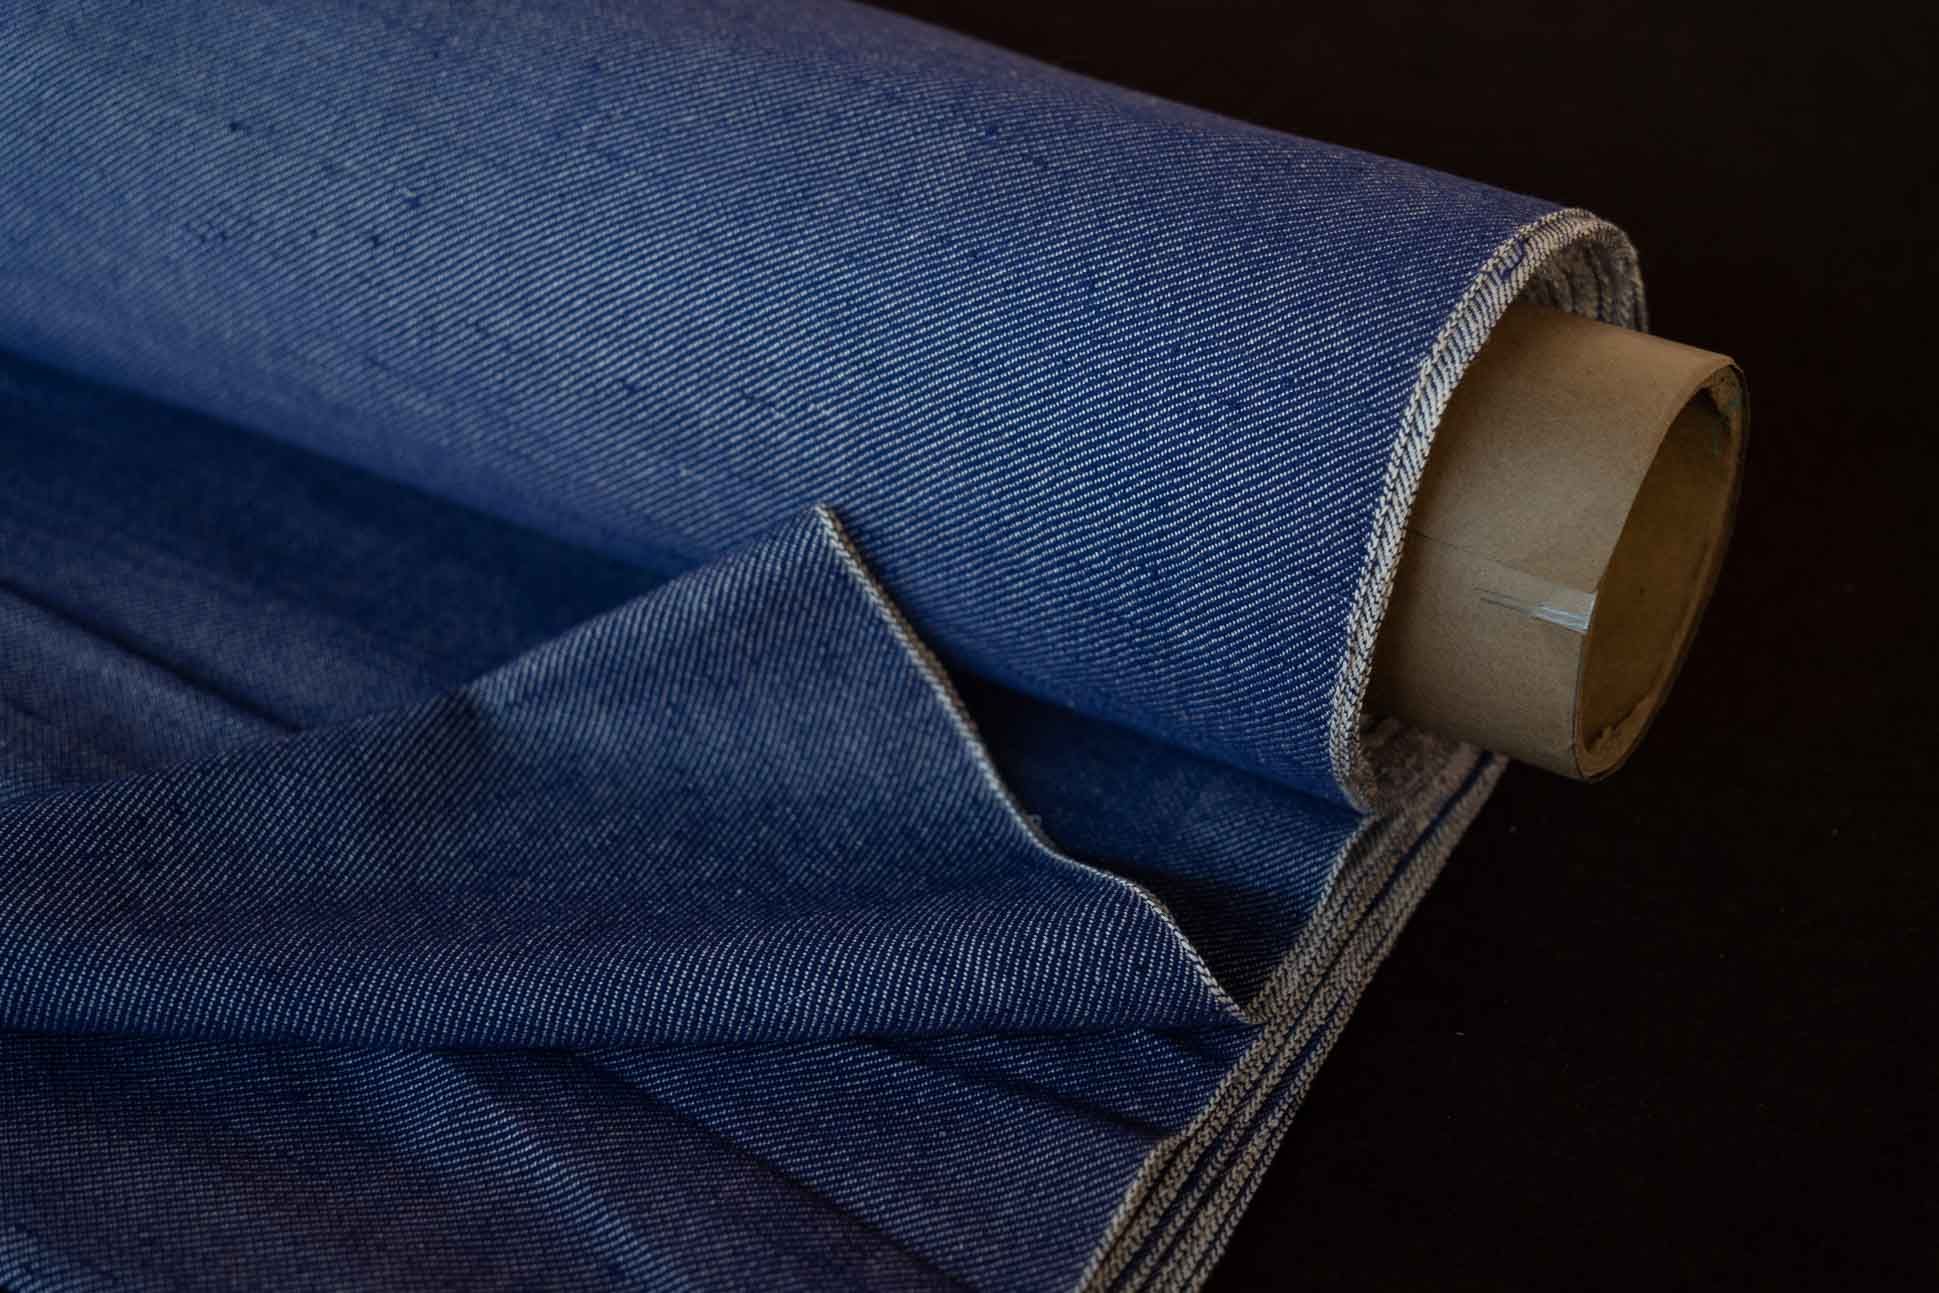 What are the properties of Khadi cloth? - Quora